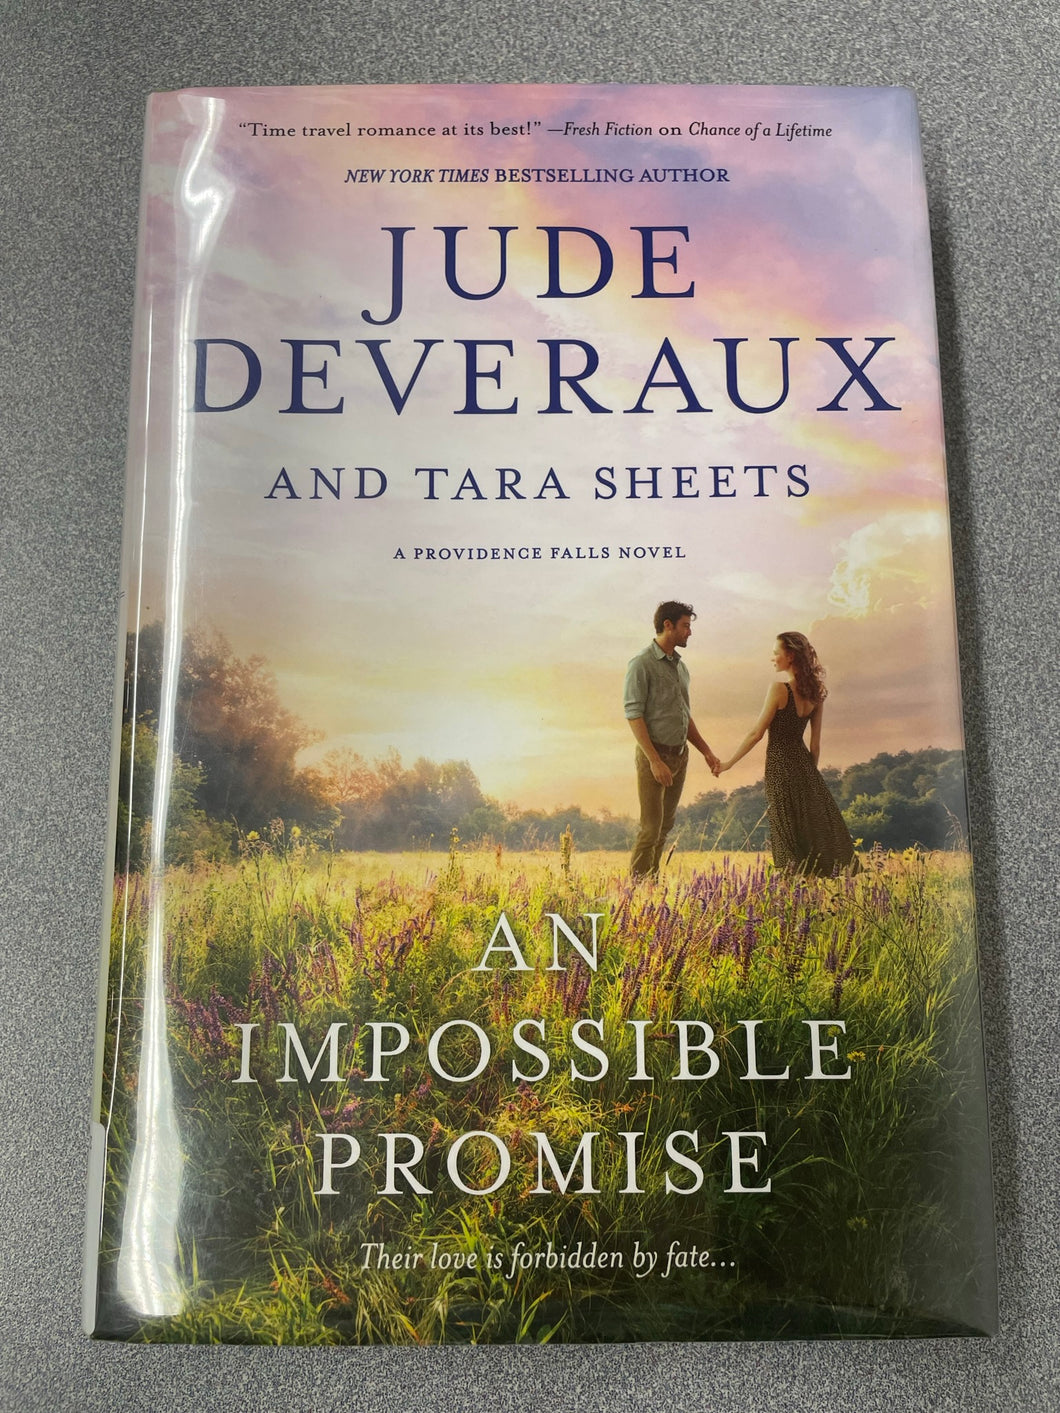 Deveraux, Jude and Tara Sheets, An Impossible Promise: a Providence Falls Novel, [2021] RBS 10/22